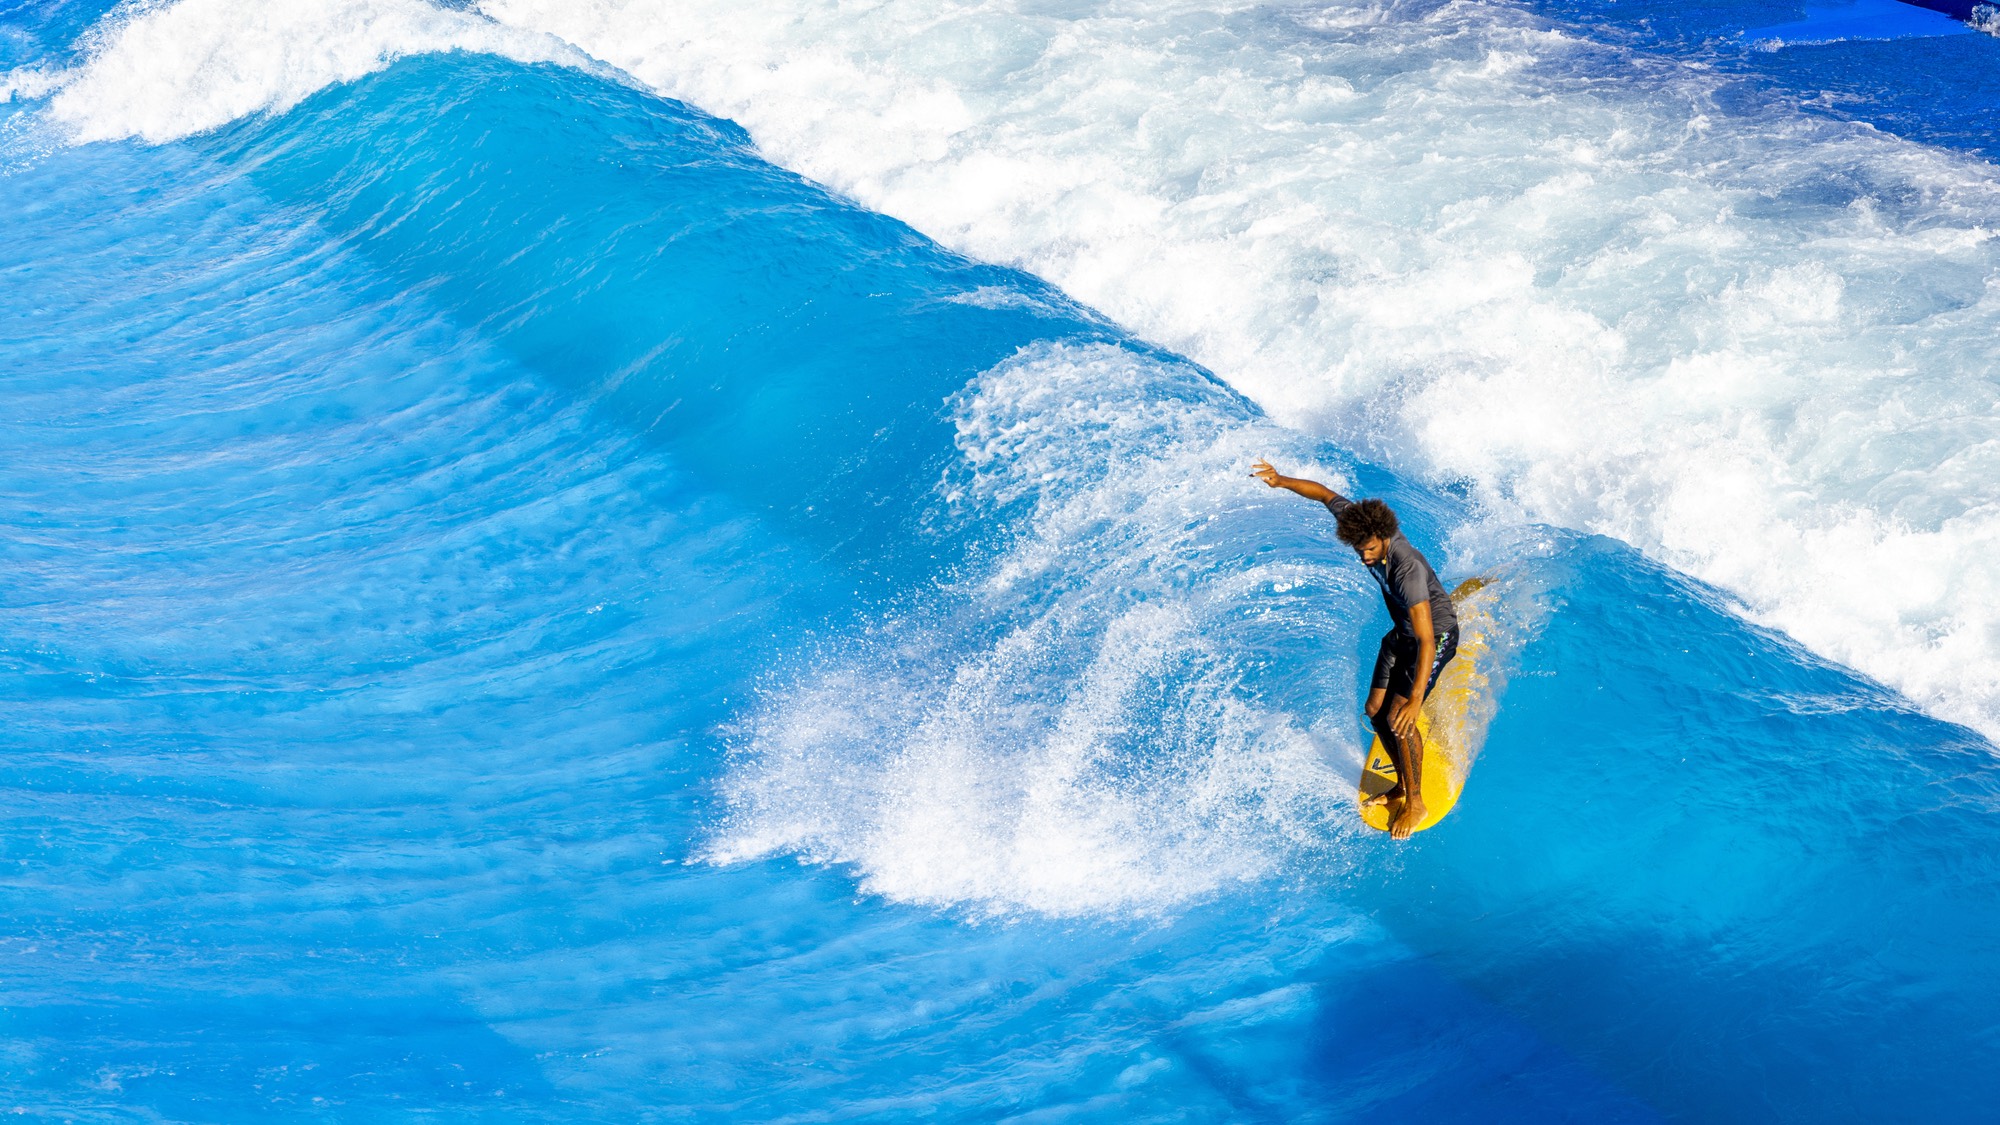 the lineup wave pool follows surfing ethos